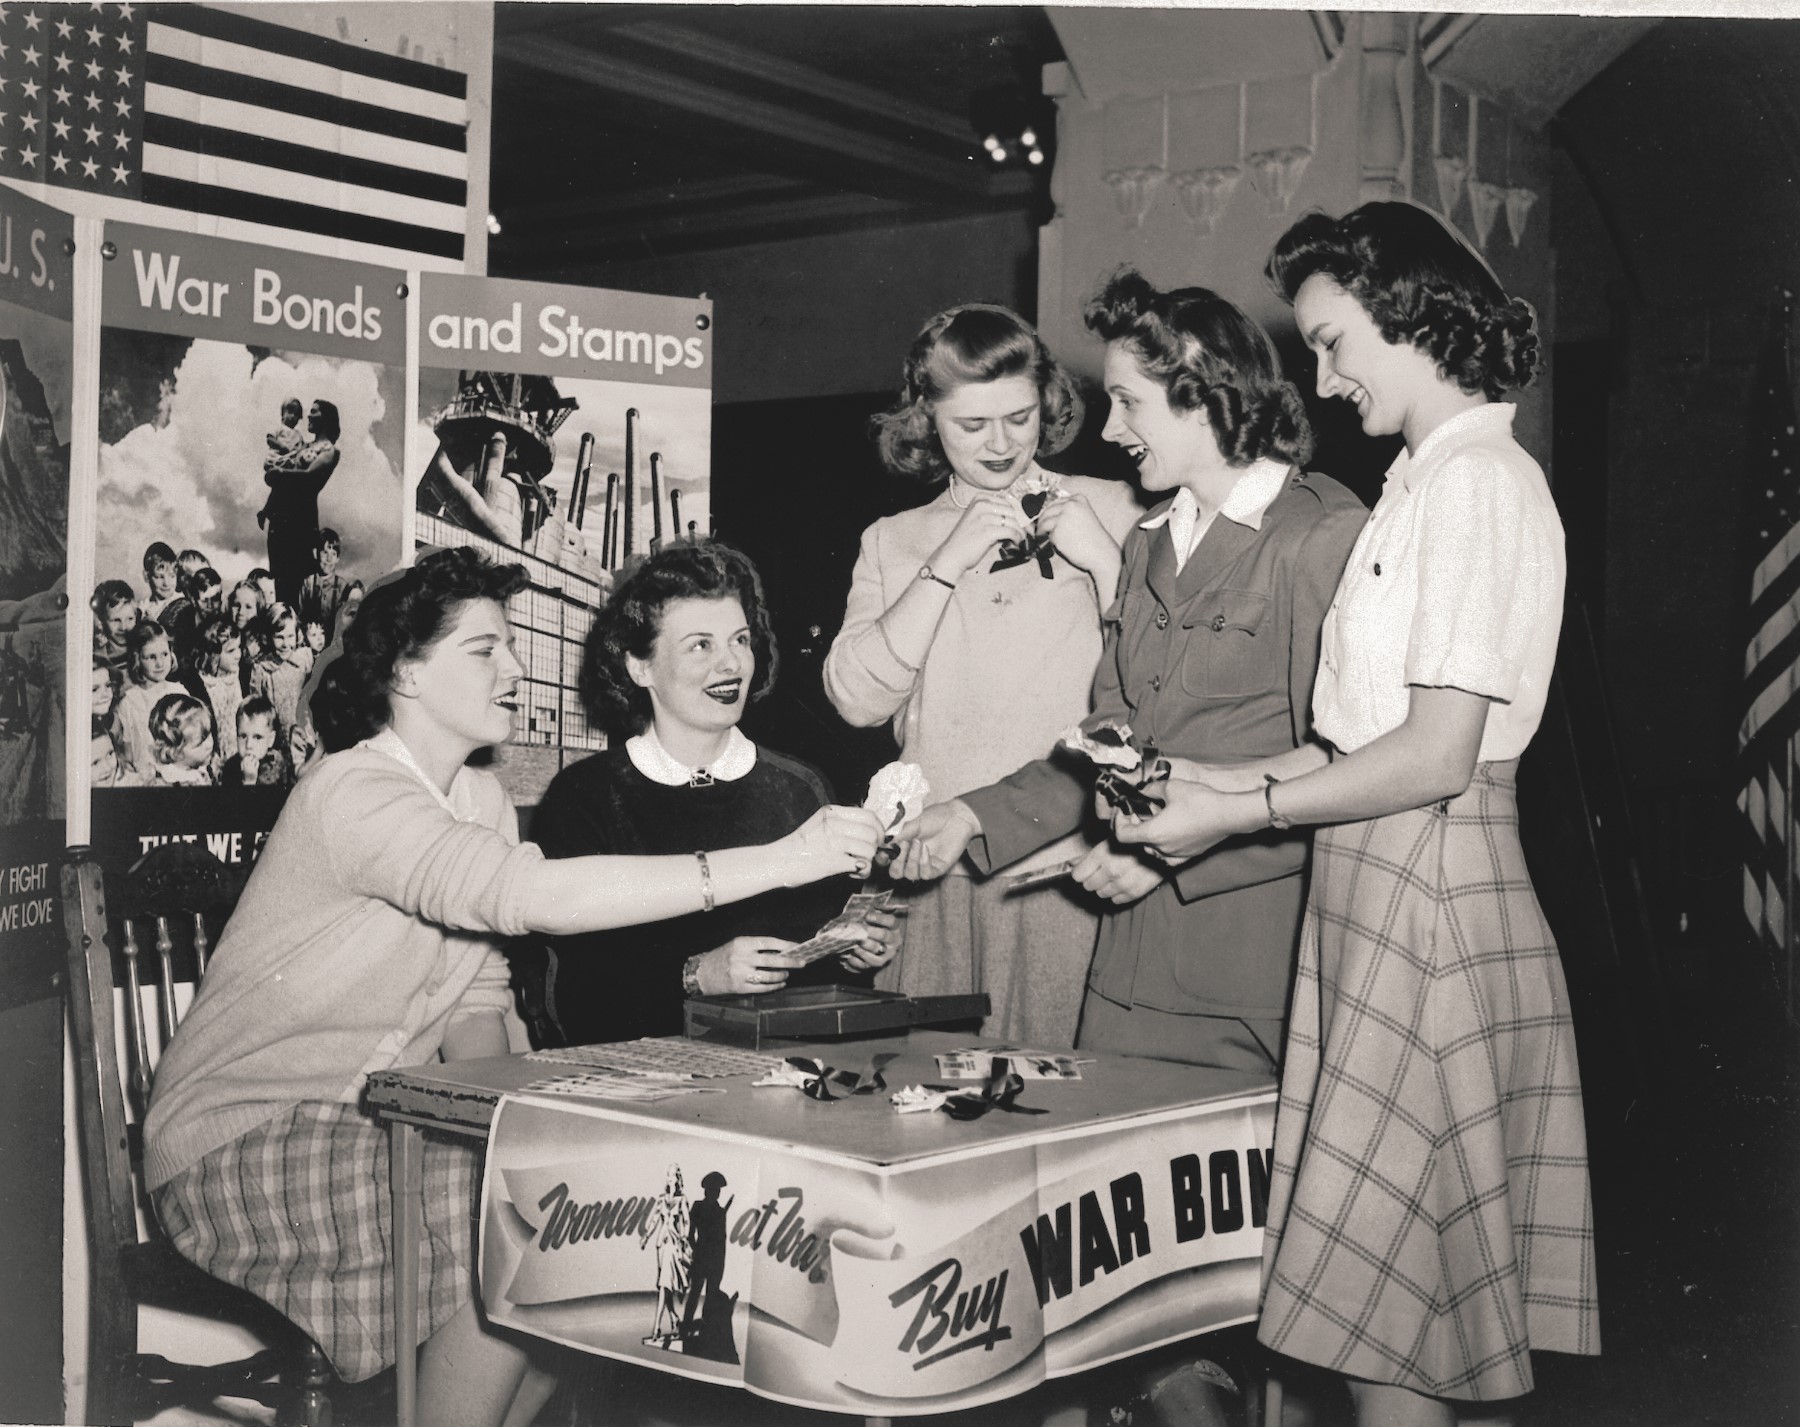 Women at a table selling war bonds